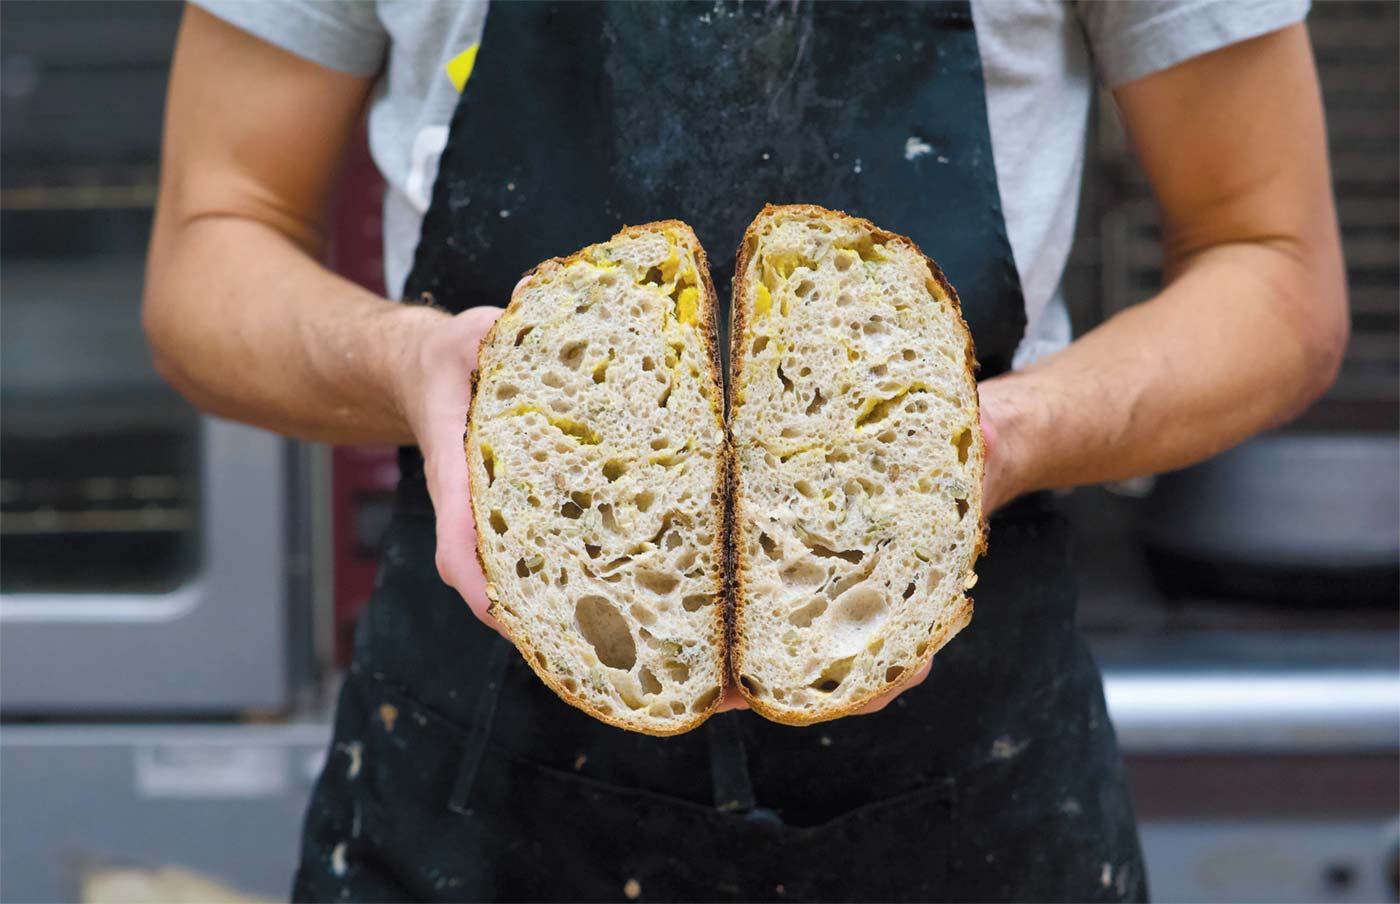 The beauty of bread. Photo by Jamie Domnick